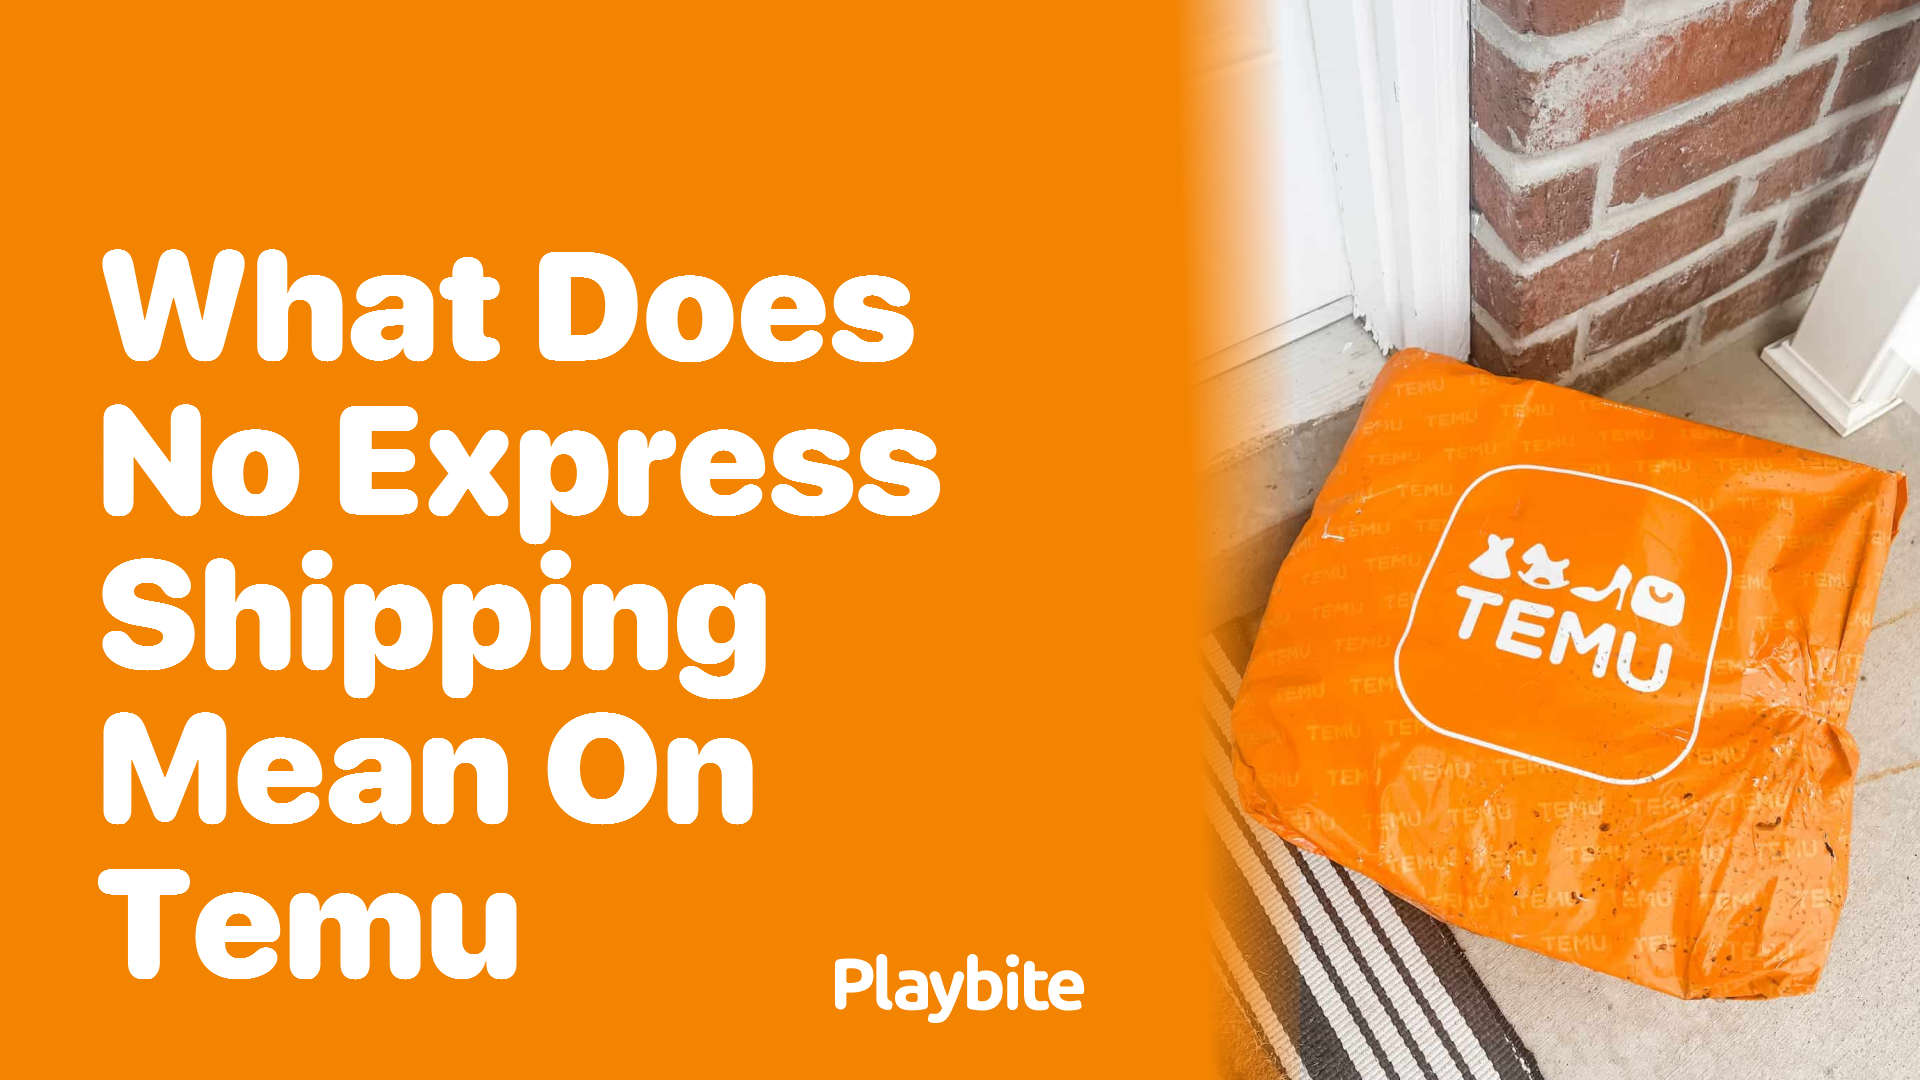 What Does 'No Express Shipping' Mean on Temu? - Playbite